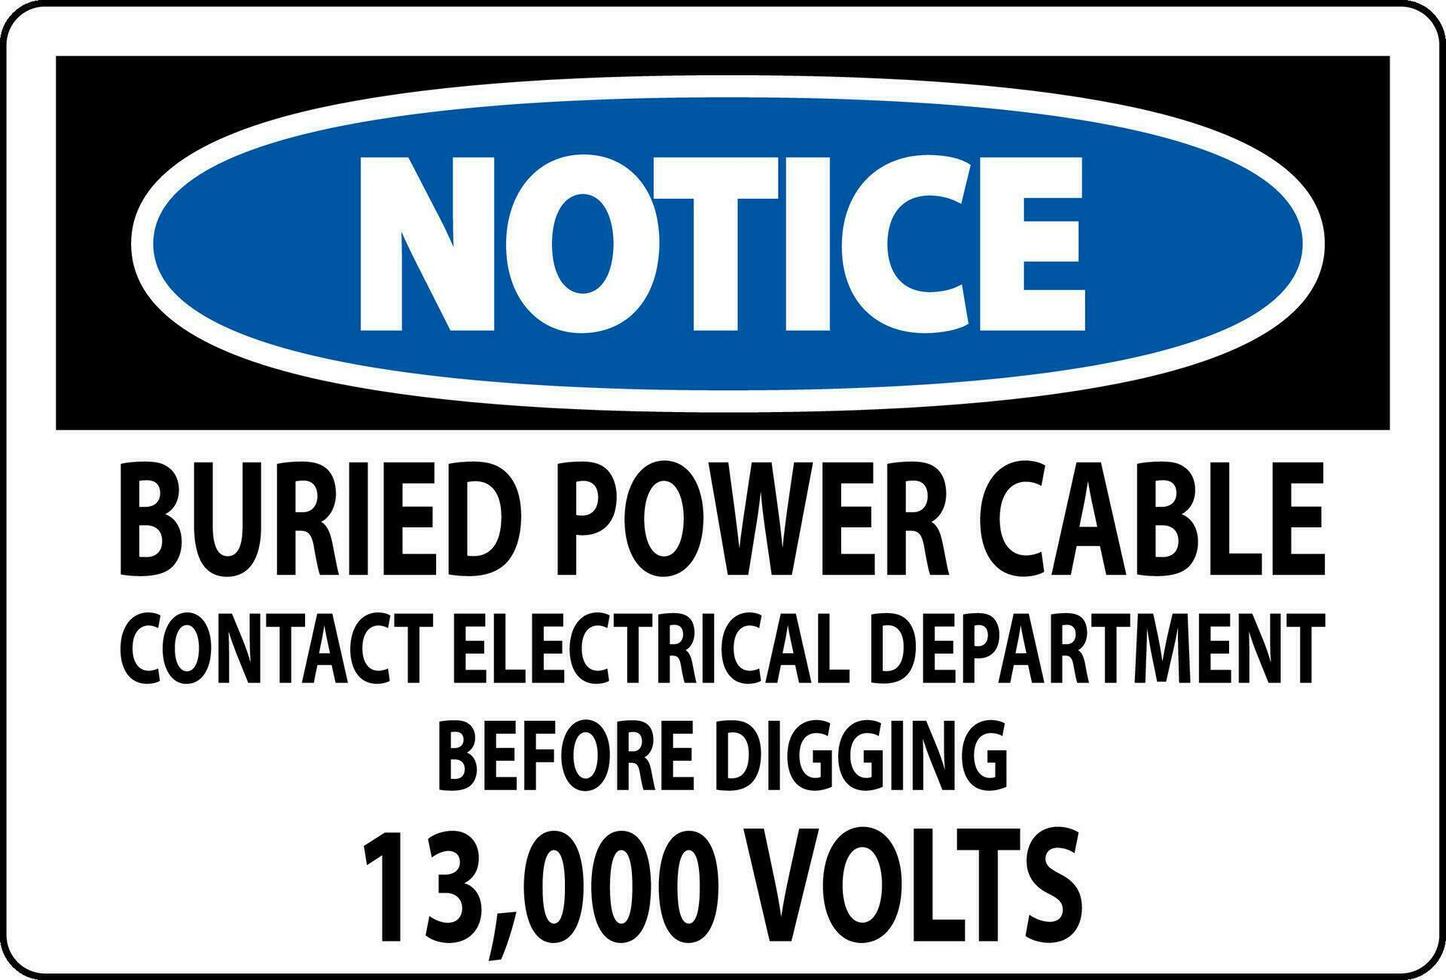 Notice Sign Buried Power Cable Contact Electrical Department Before Digging 13,000 Volts vector